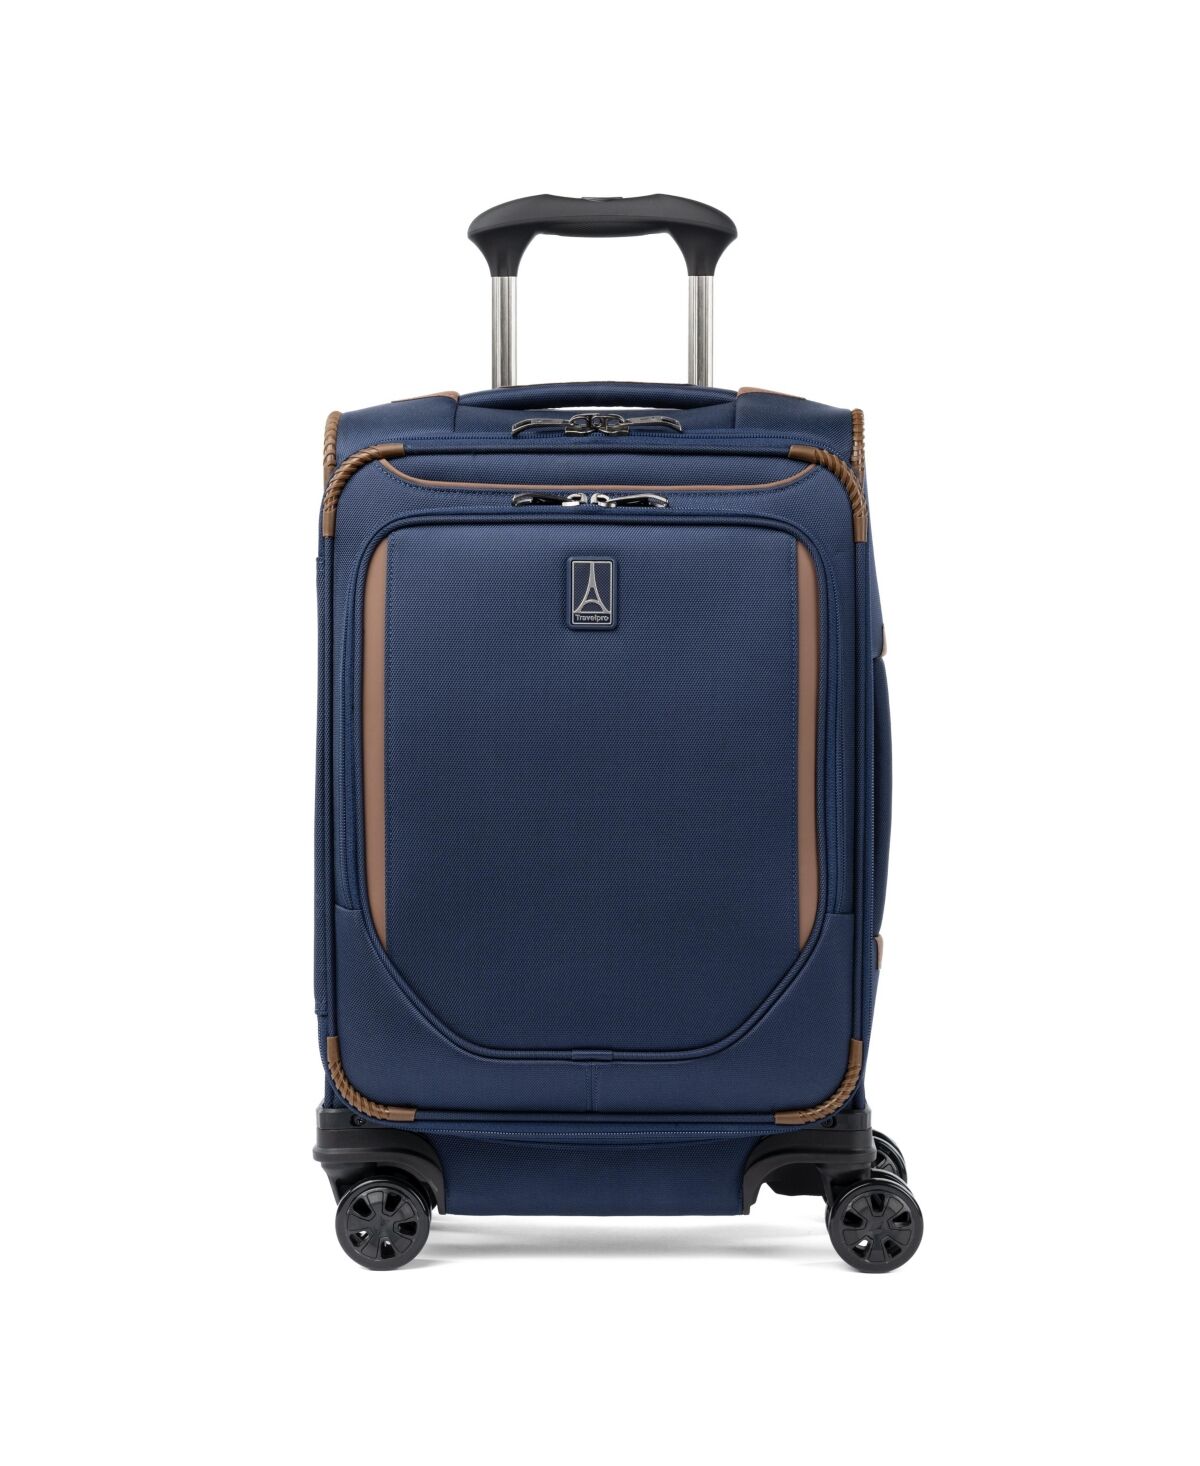 Travelpro New! Travelpro Crew Classic Compact Carry-on Expandable Spinner Luggage - Patriot Blue